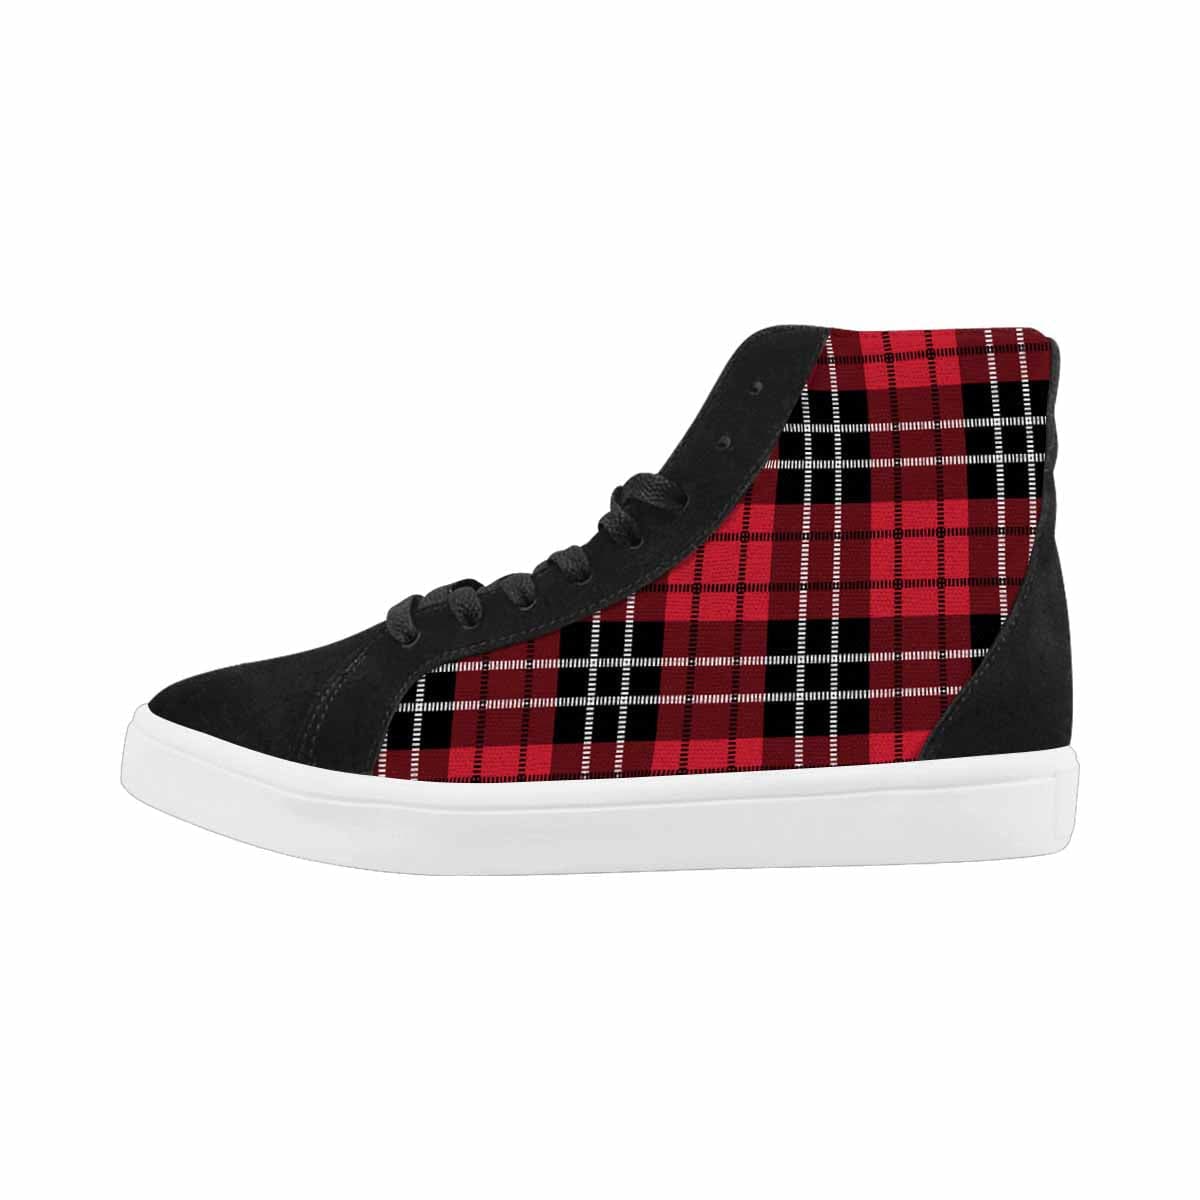 Sneakers For Women, Buffalo Plaid Red And Black - High Top Sports Shoes-1